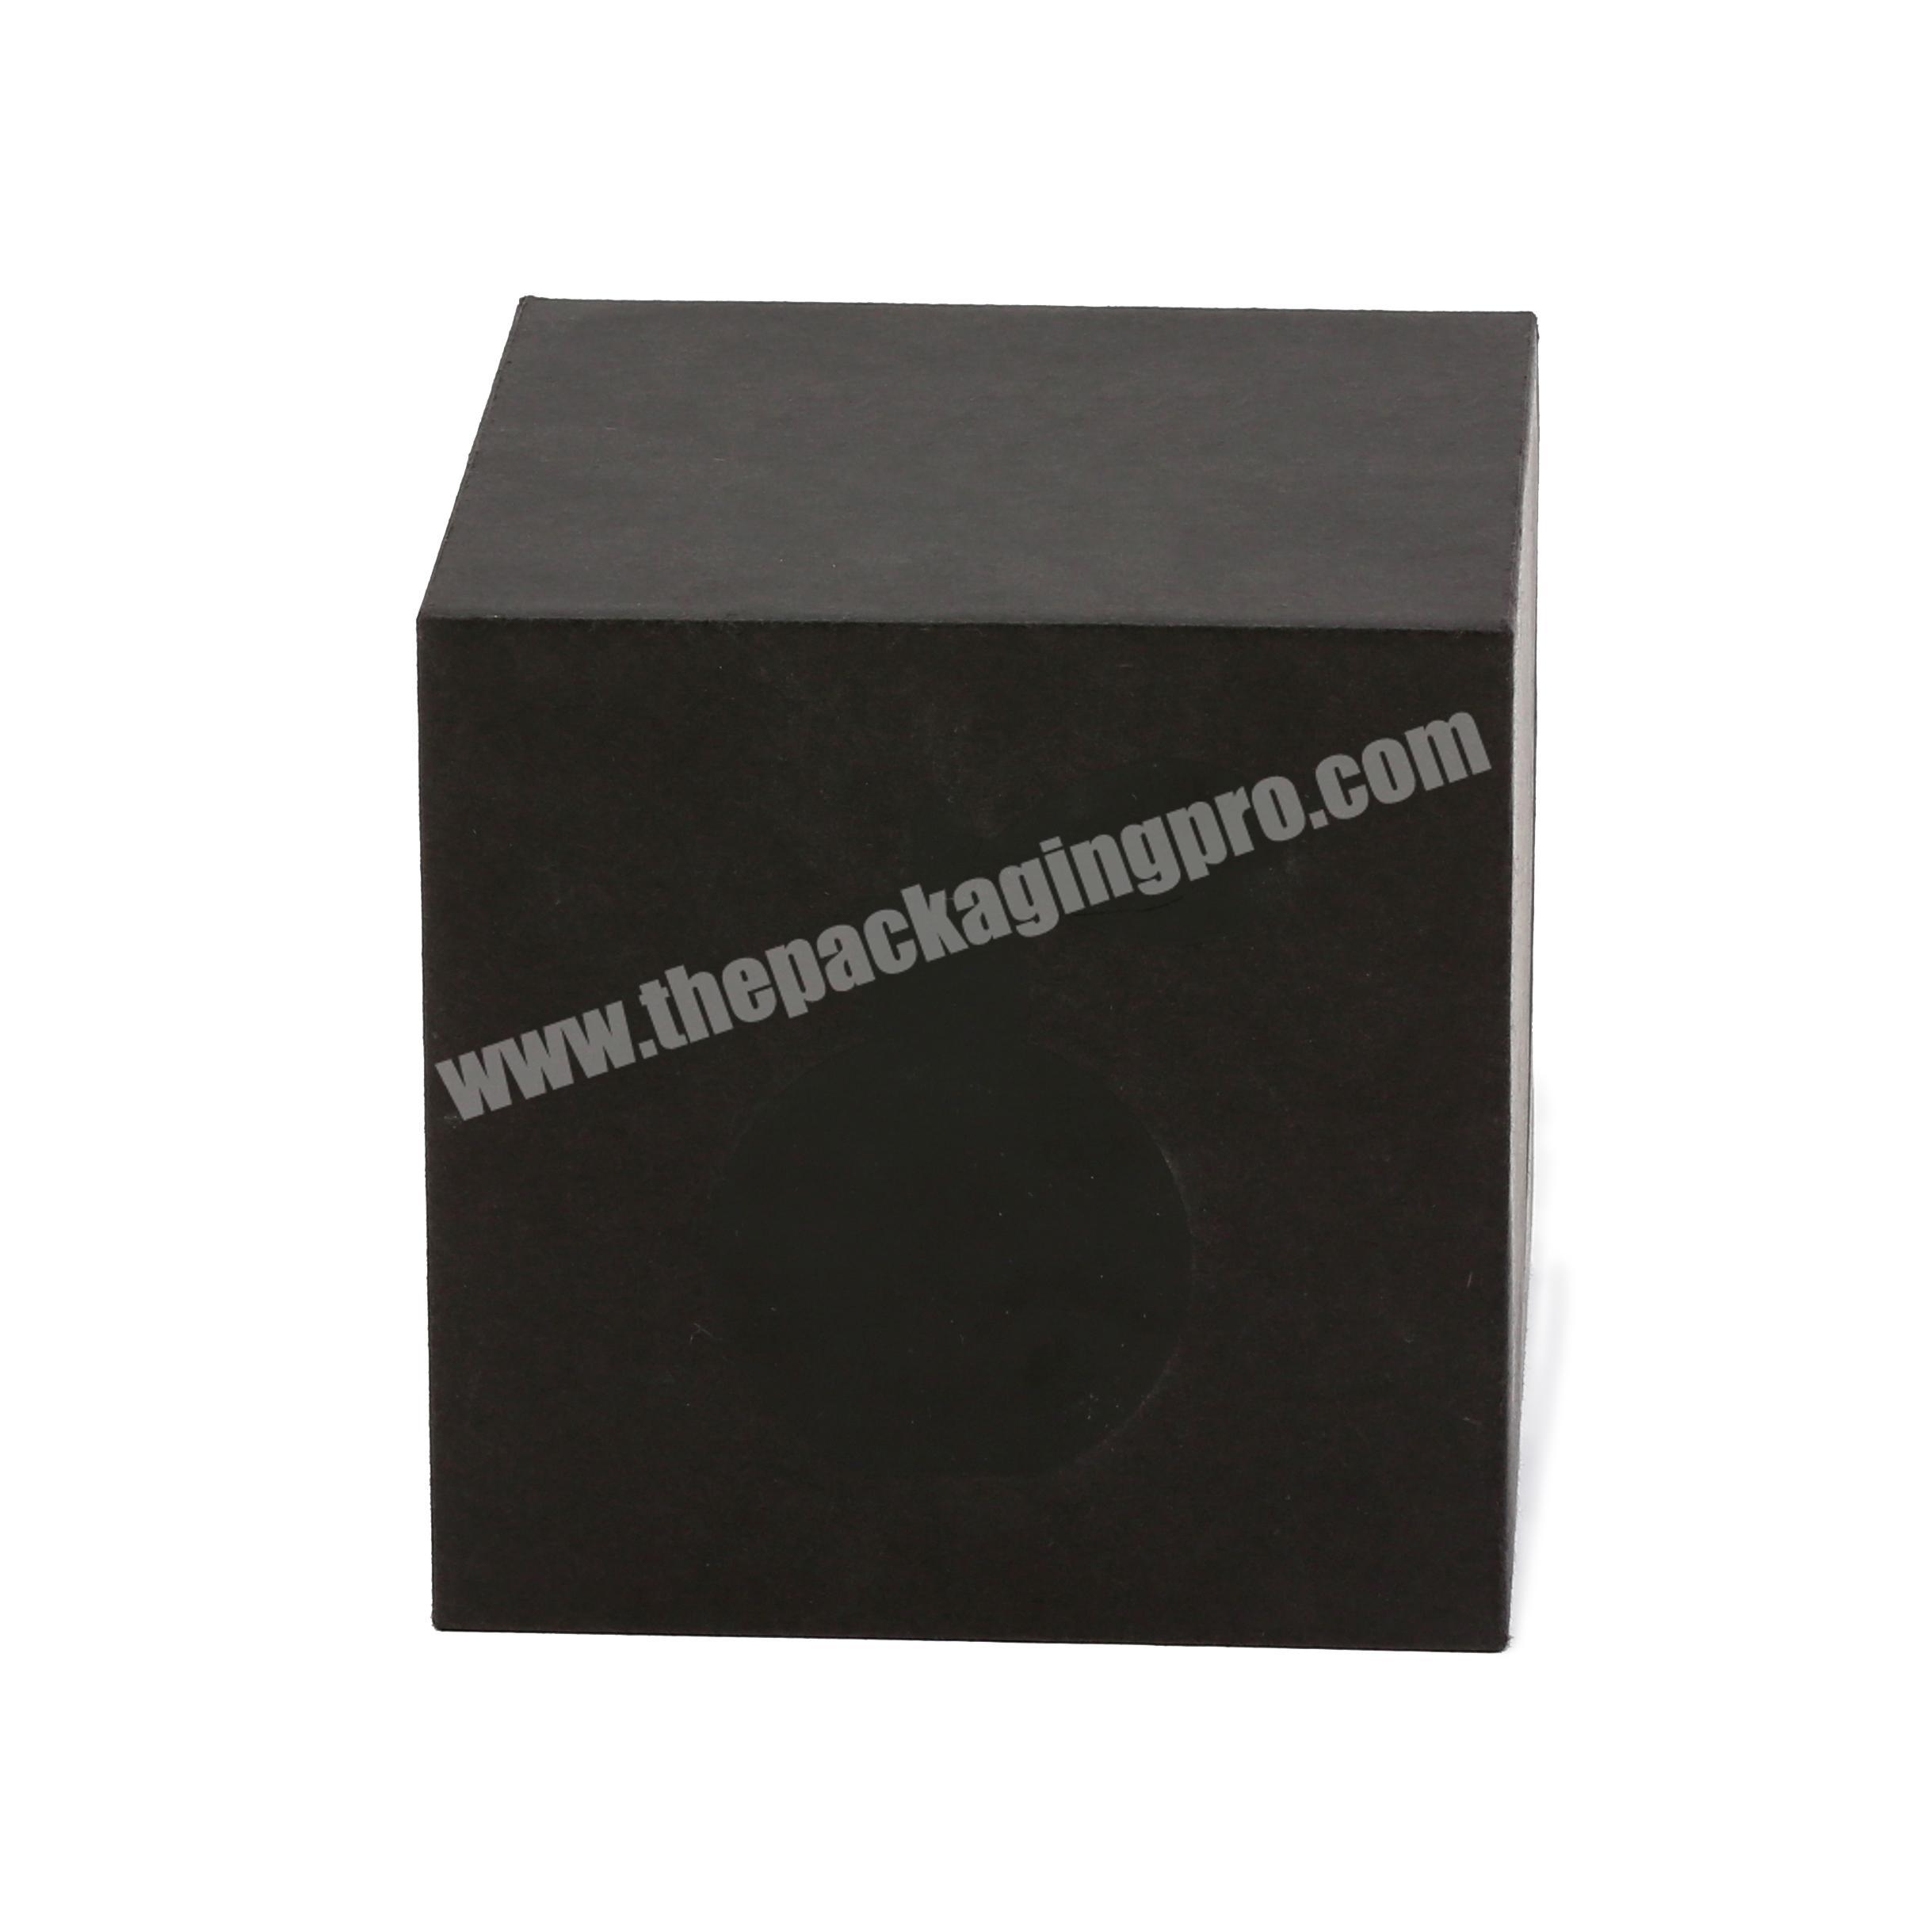 Rigid box with ribbon closure made by China packaging factory